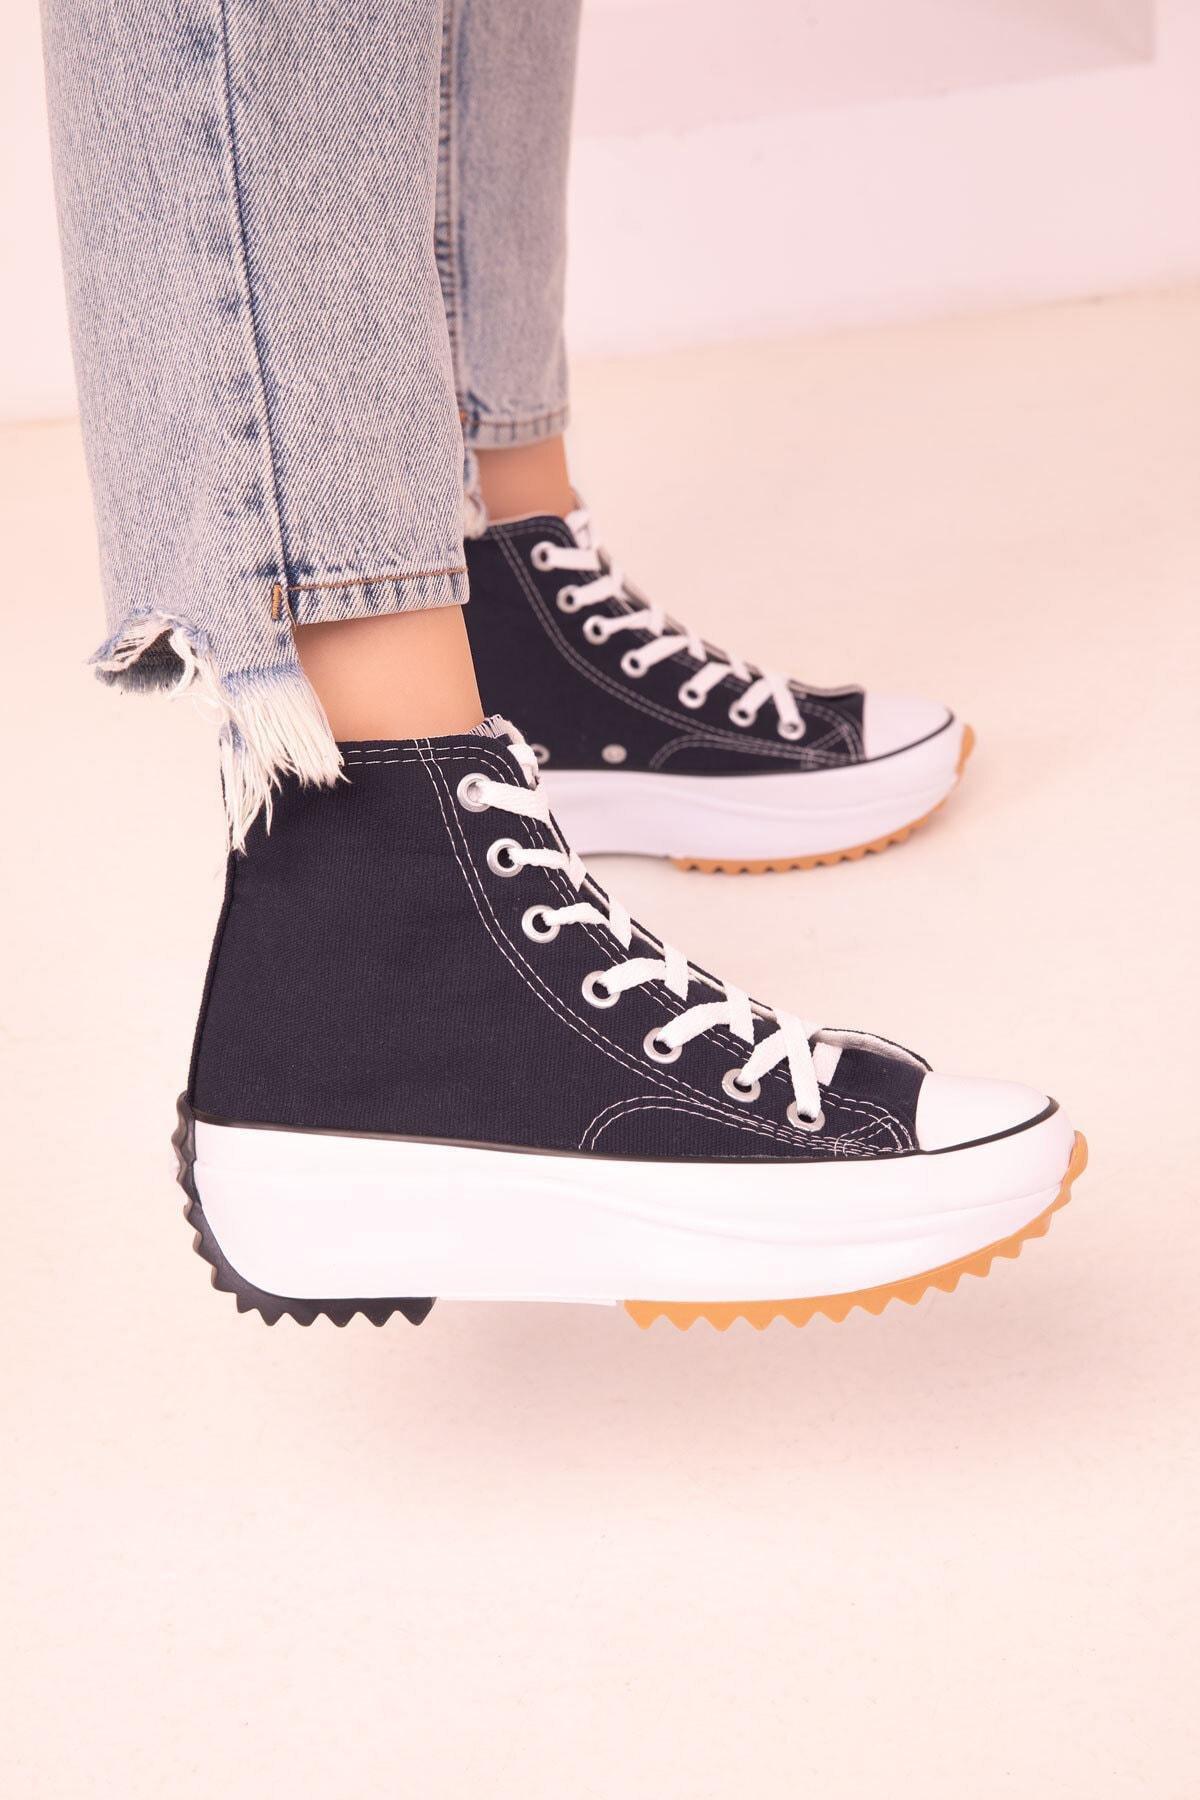 SOHO - Navy Lace Up Sneakers